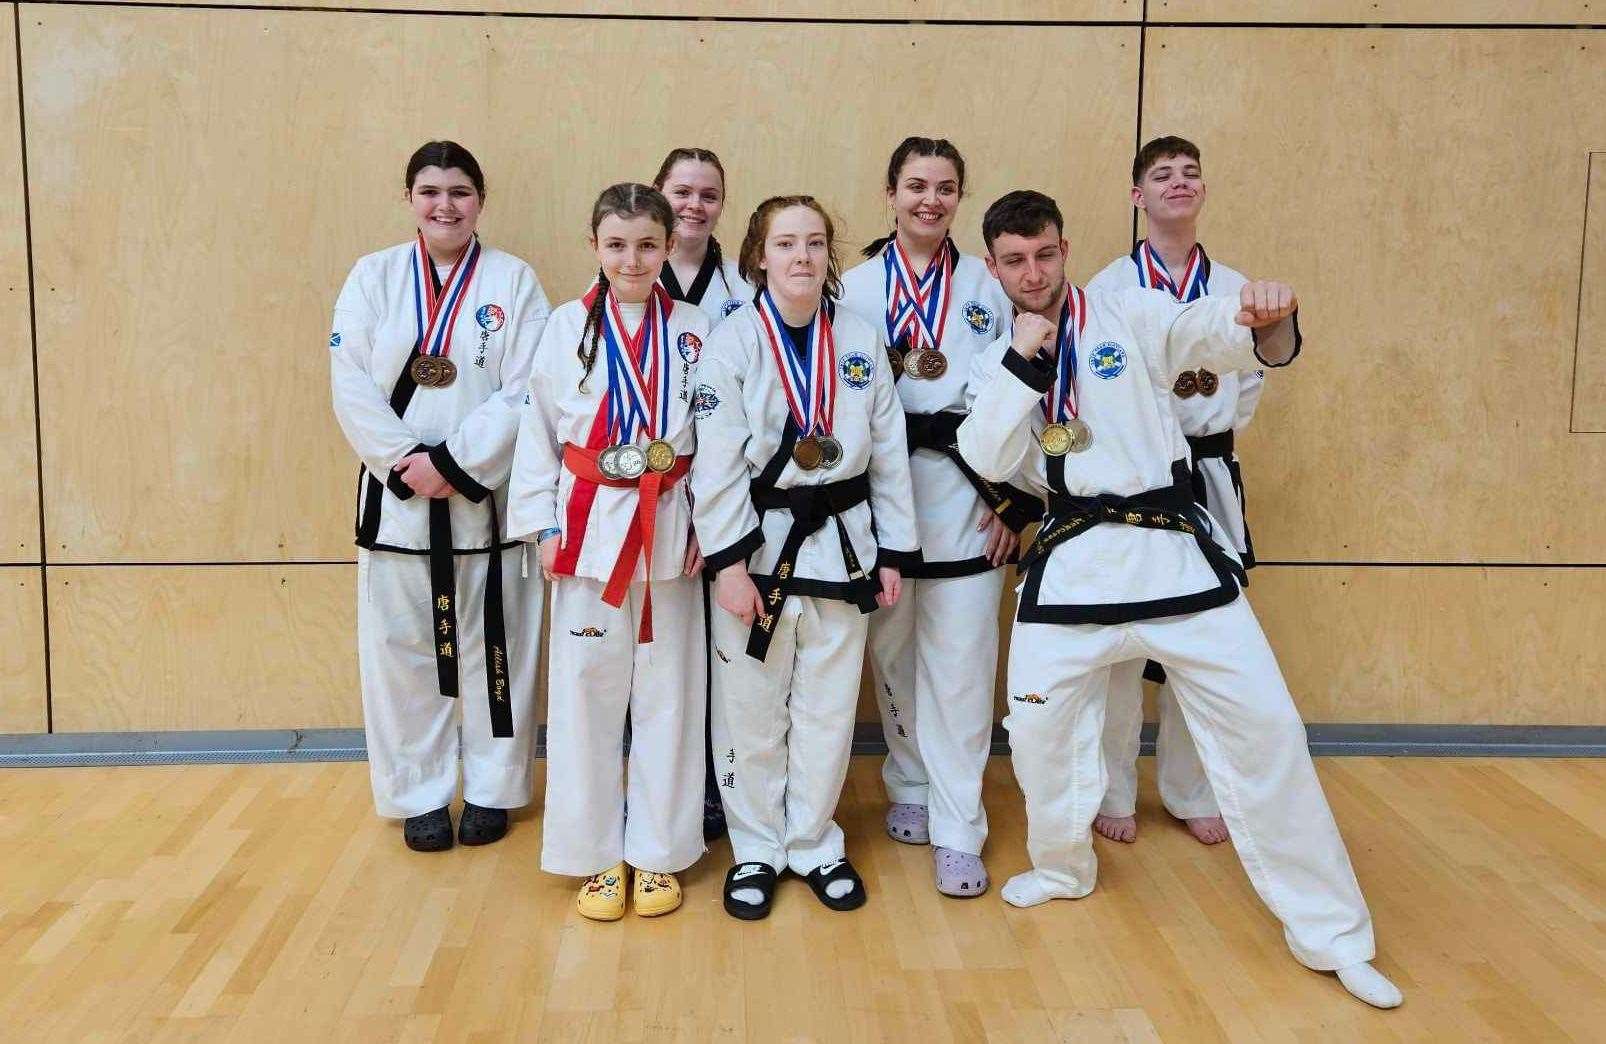 Inverness Tang Soo Do won a total of 18 medals at the British Championships in Newcastle.